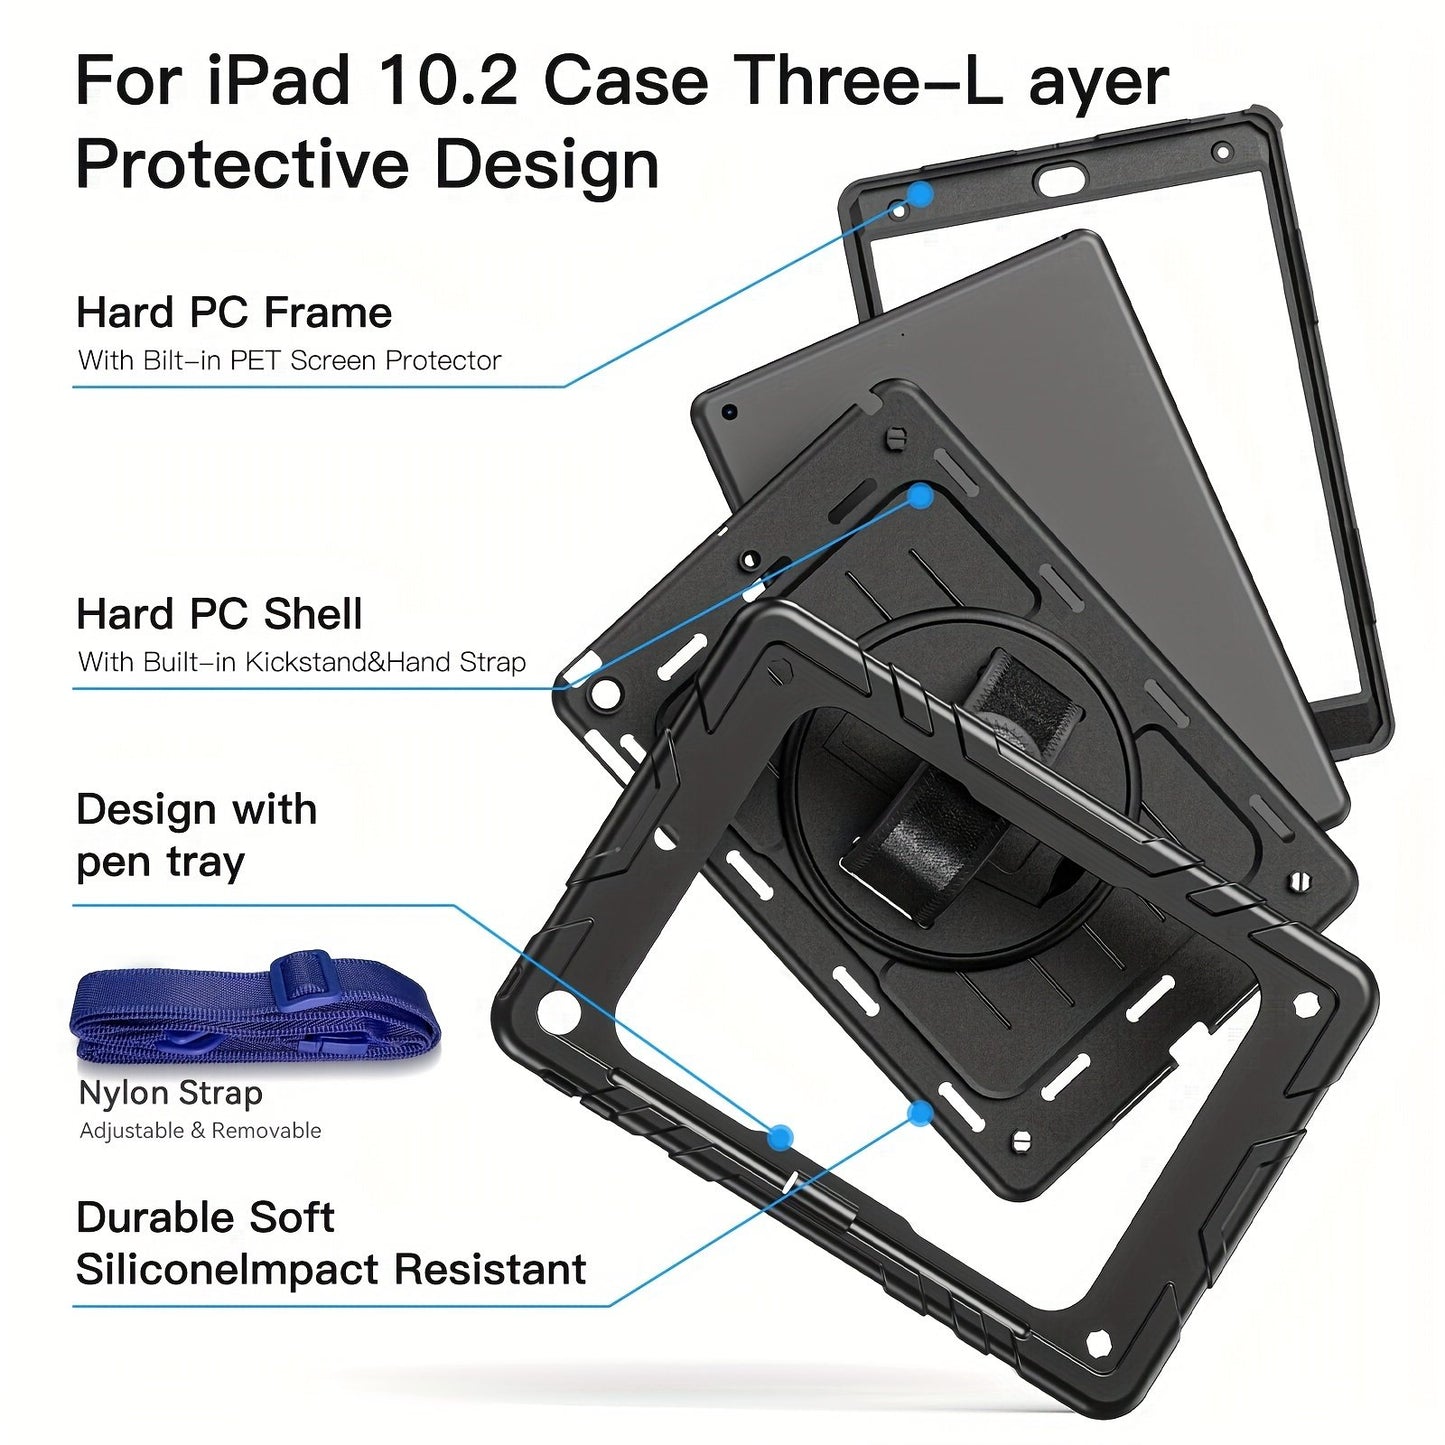 360 Turntable Design Case For IPad 7/8/9 10.2-inch 2019/2020/2021 Protective Case Pen Holder With Bracket Heavy Duty Shockproof And Falling Protection Case For IPad 7/8/9 10.2-inch 2019/2020/2021 Protective Case With Pen Slot